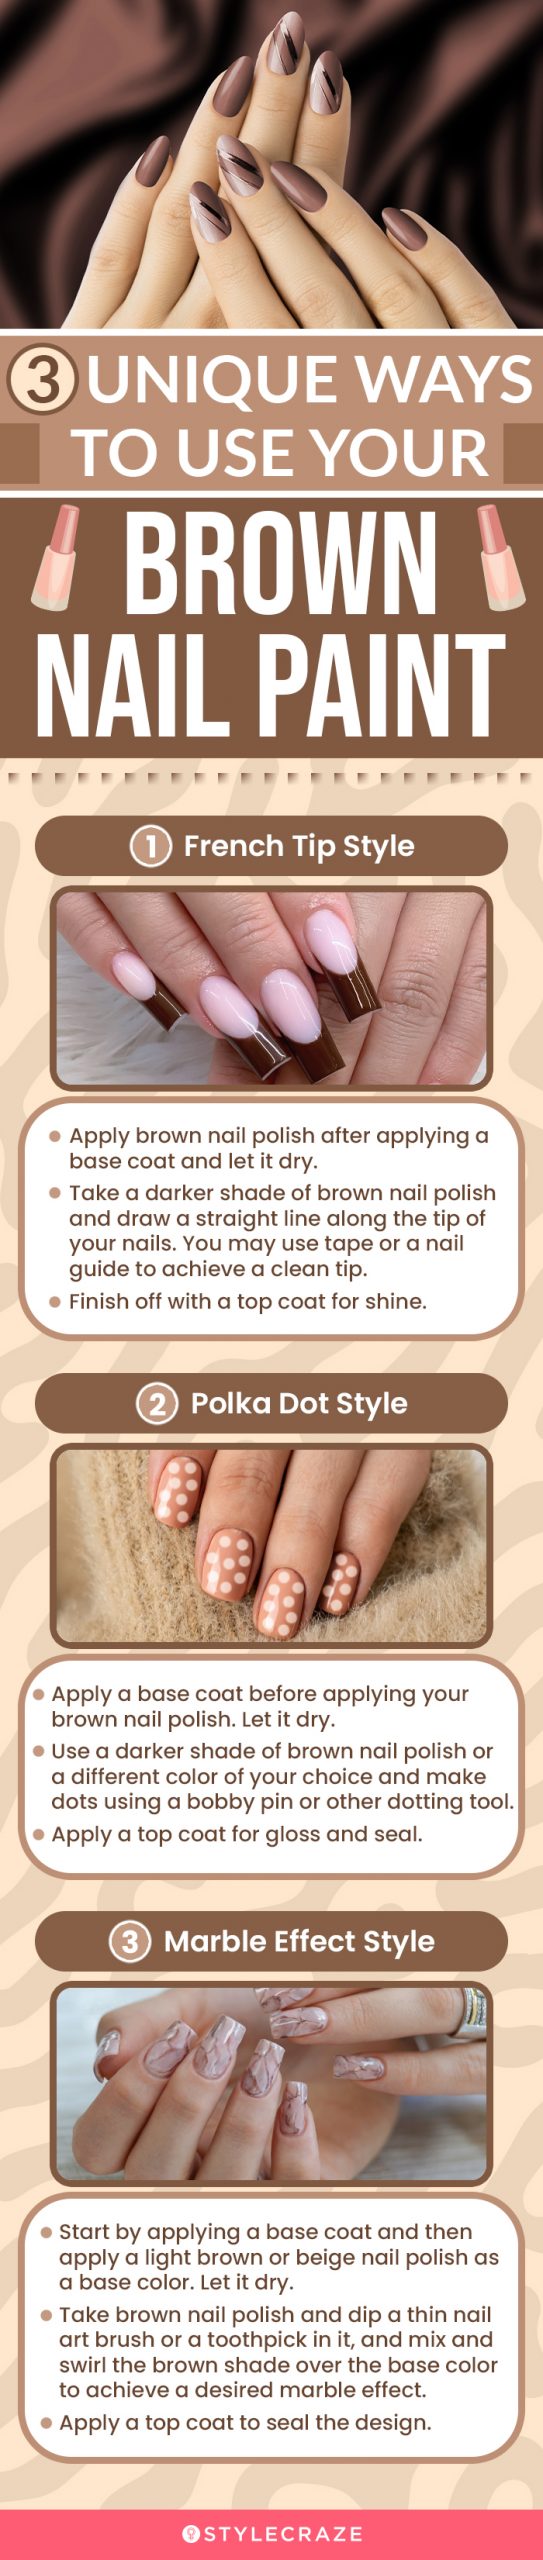 3 Unique Ways To Use Your Brown Nail Paint (infographic)